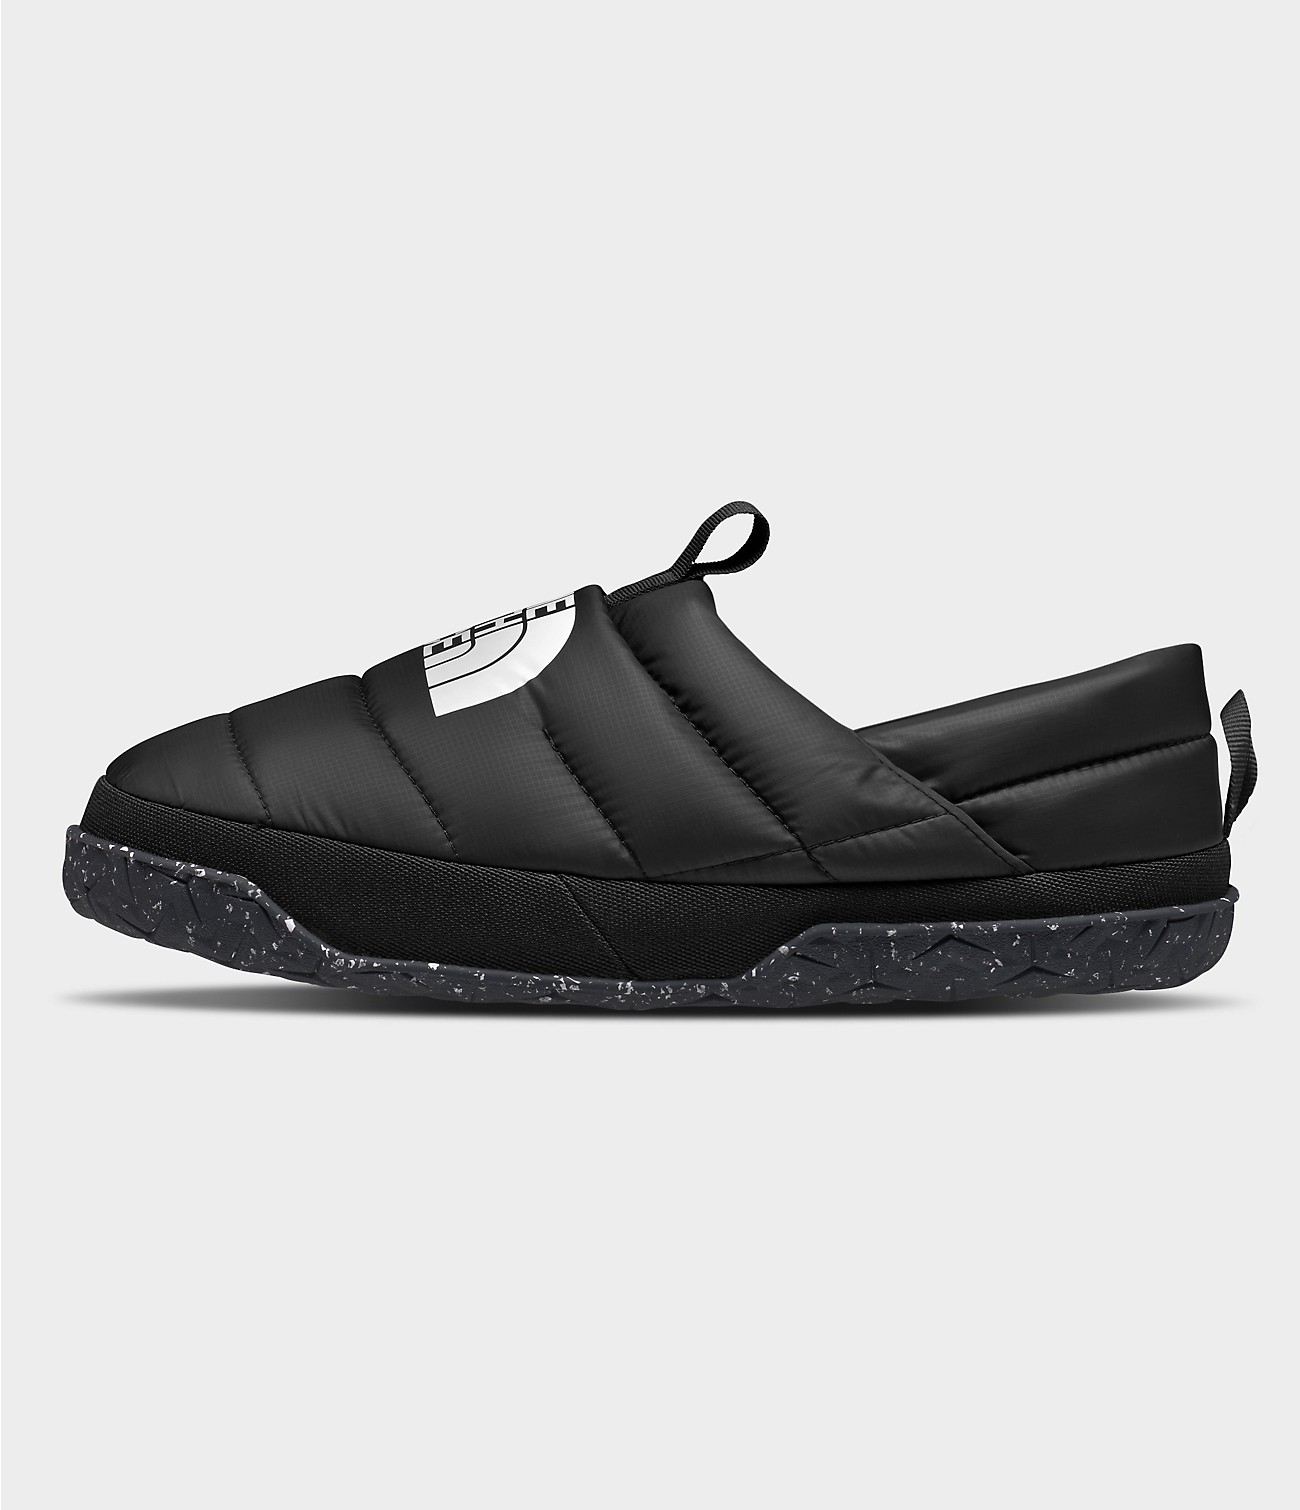 Unlock Wilderness' choice in the Adidas Vs North Face comparison, the Nuptse Mules by The North Face